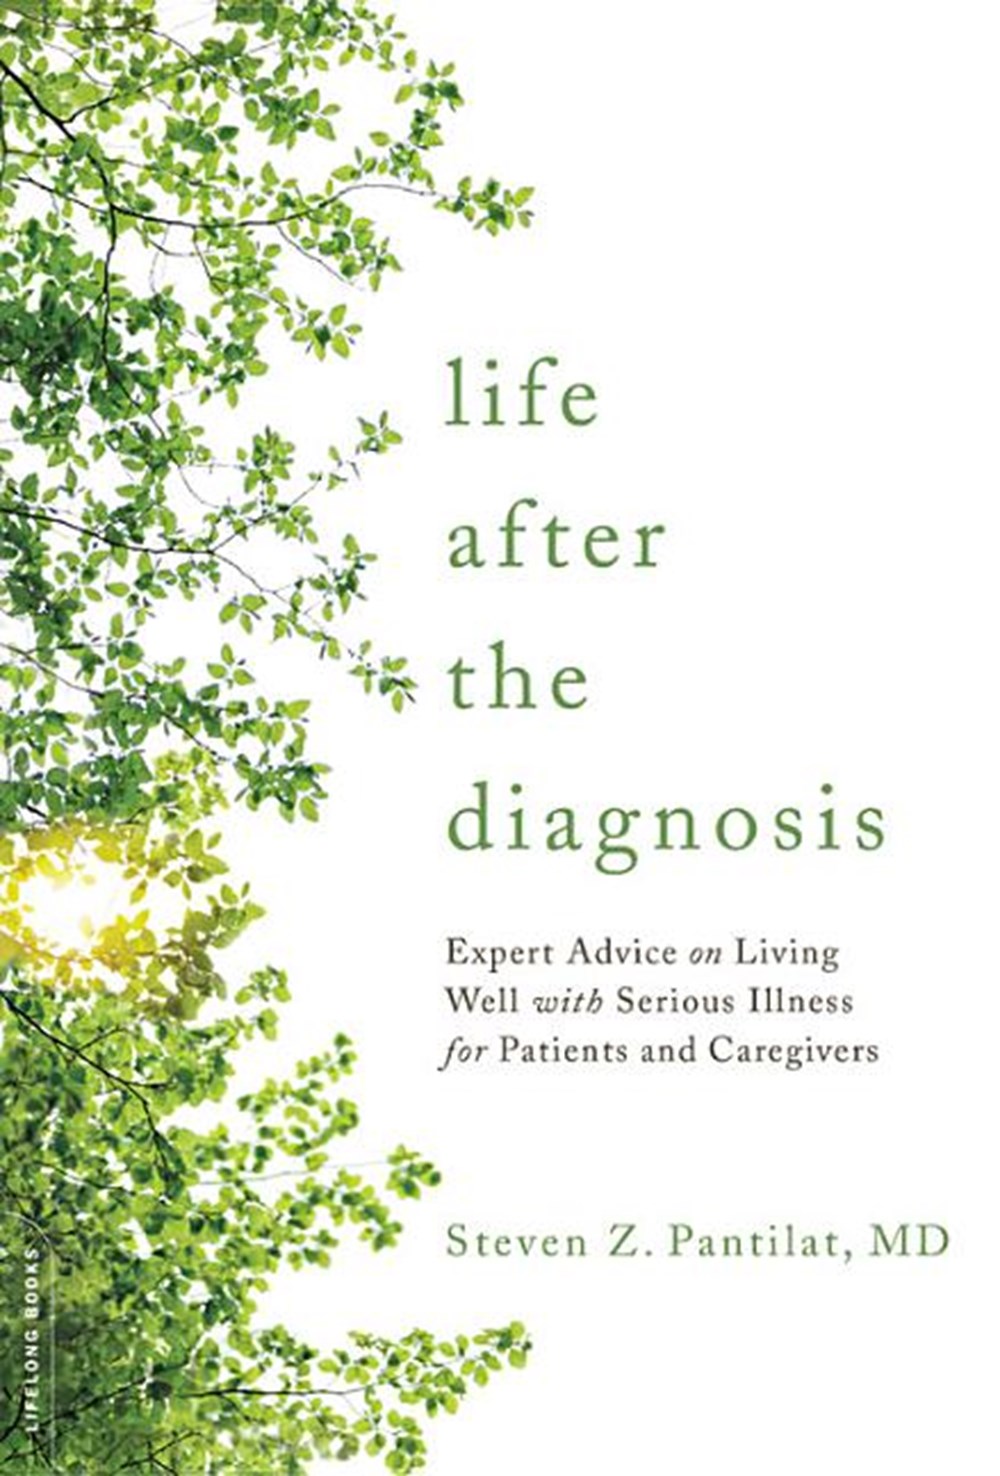 Life After the Diagnosis: Expert Advice on Living Well with Serious Illness for Patients and Caregiv